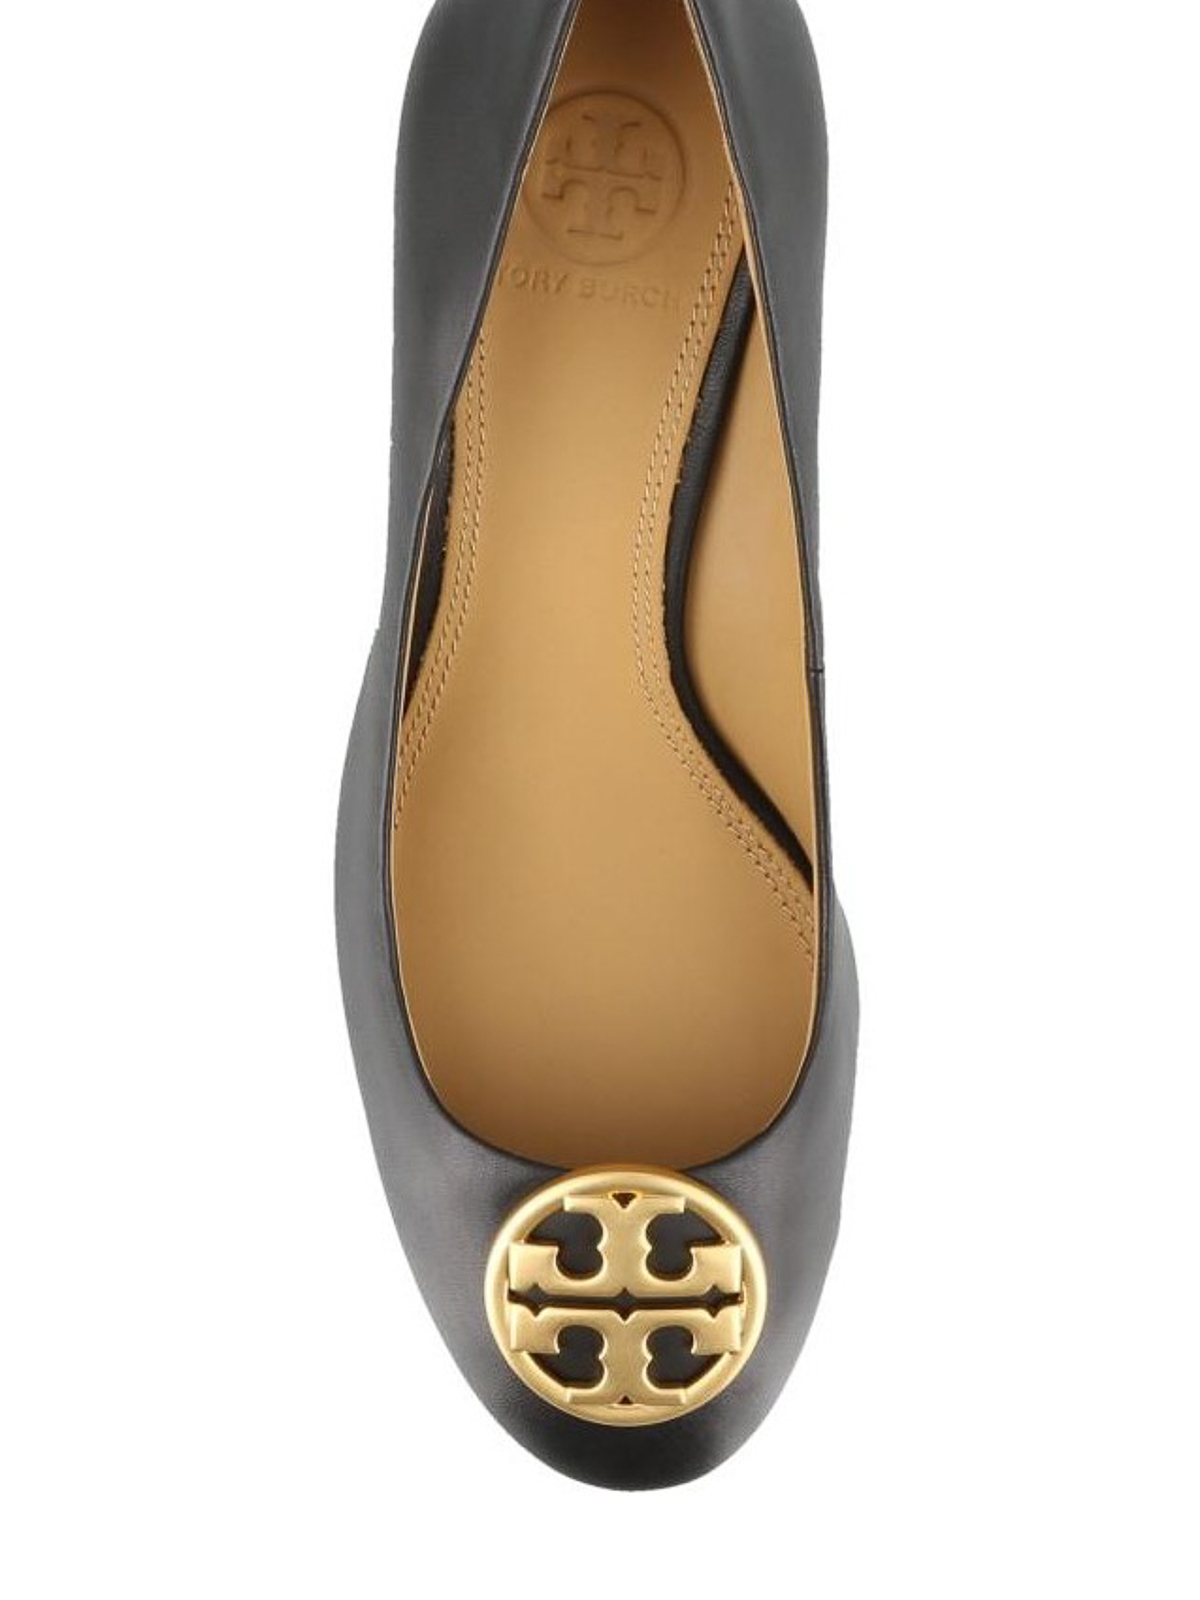 Court shoes Tory Burch - Chelsea leather wedge pumps - 45899006